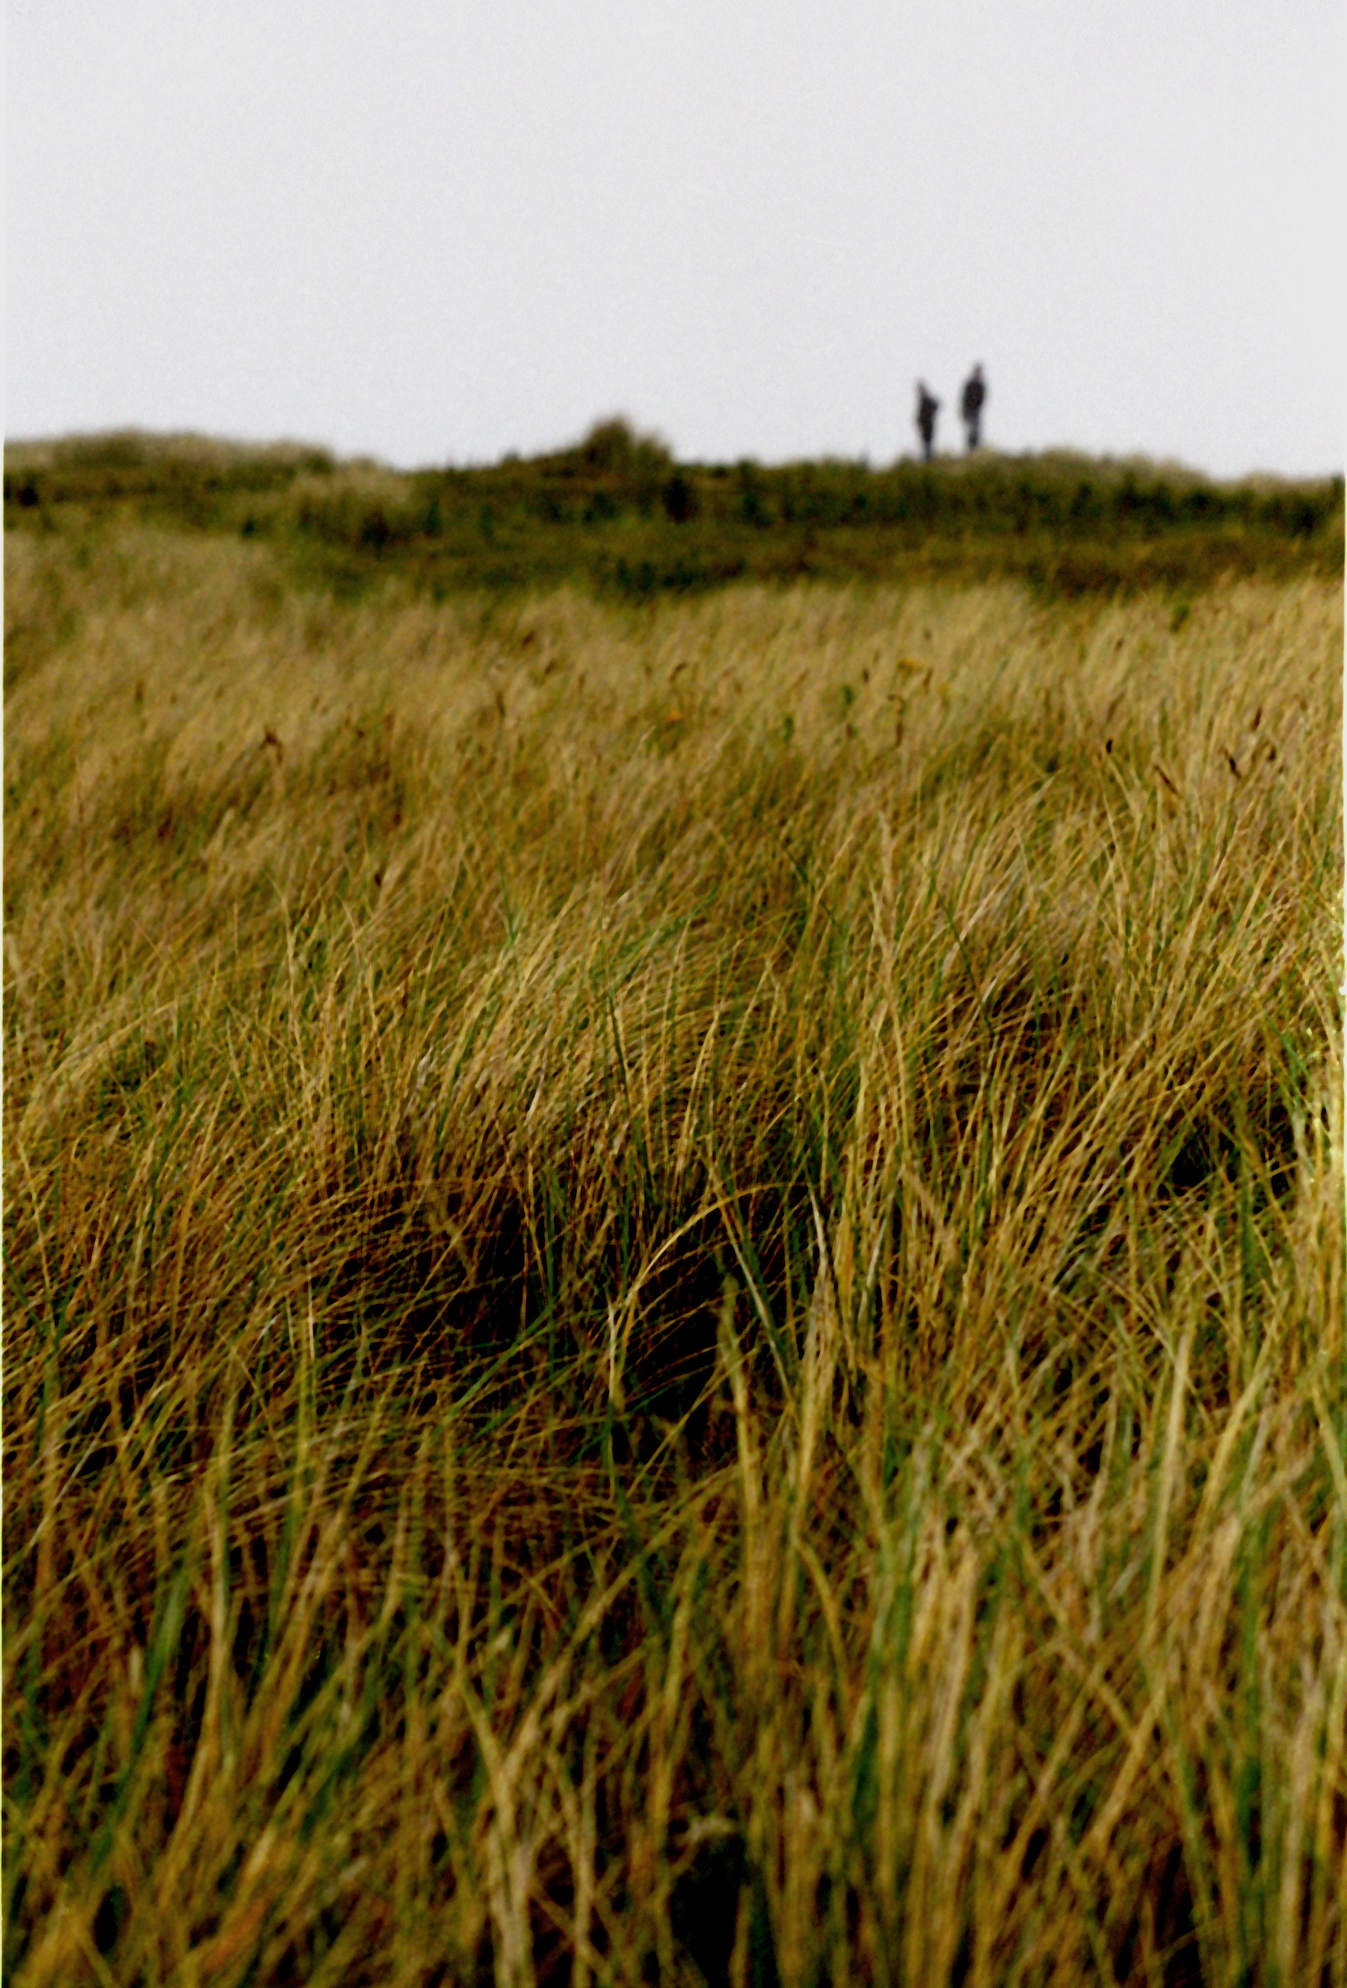 Two people standing on a grassy hill in the distance